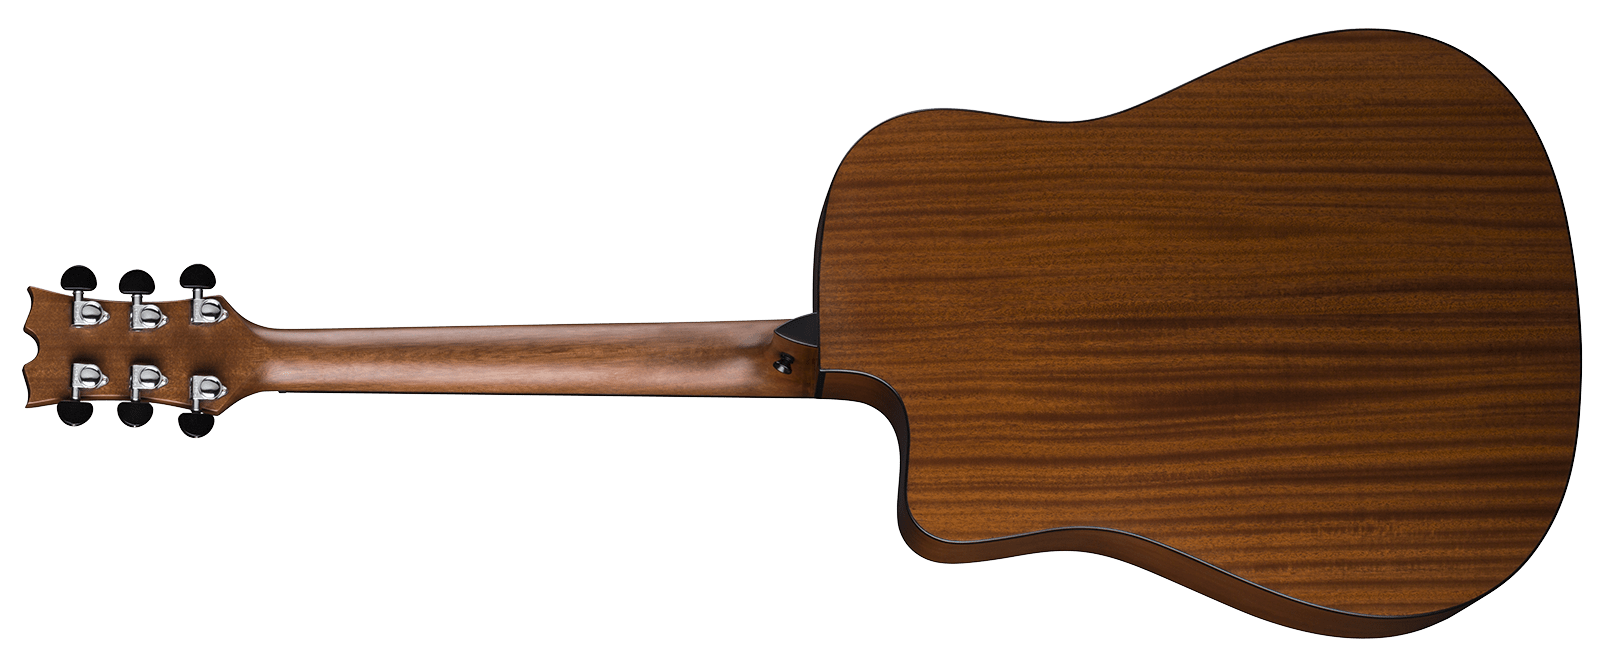 Wooden Guitar PNG Background Image